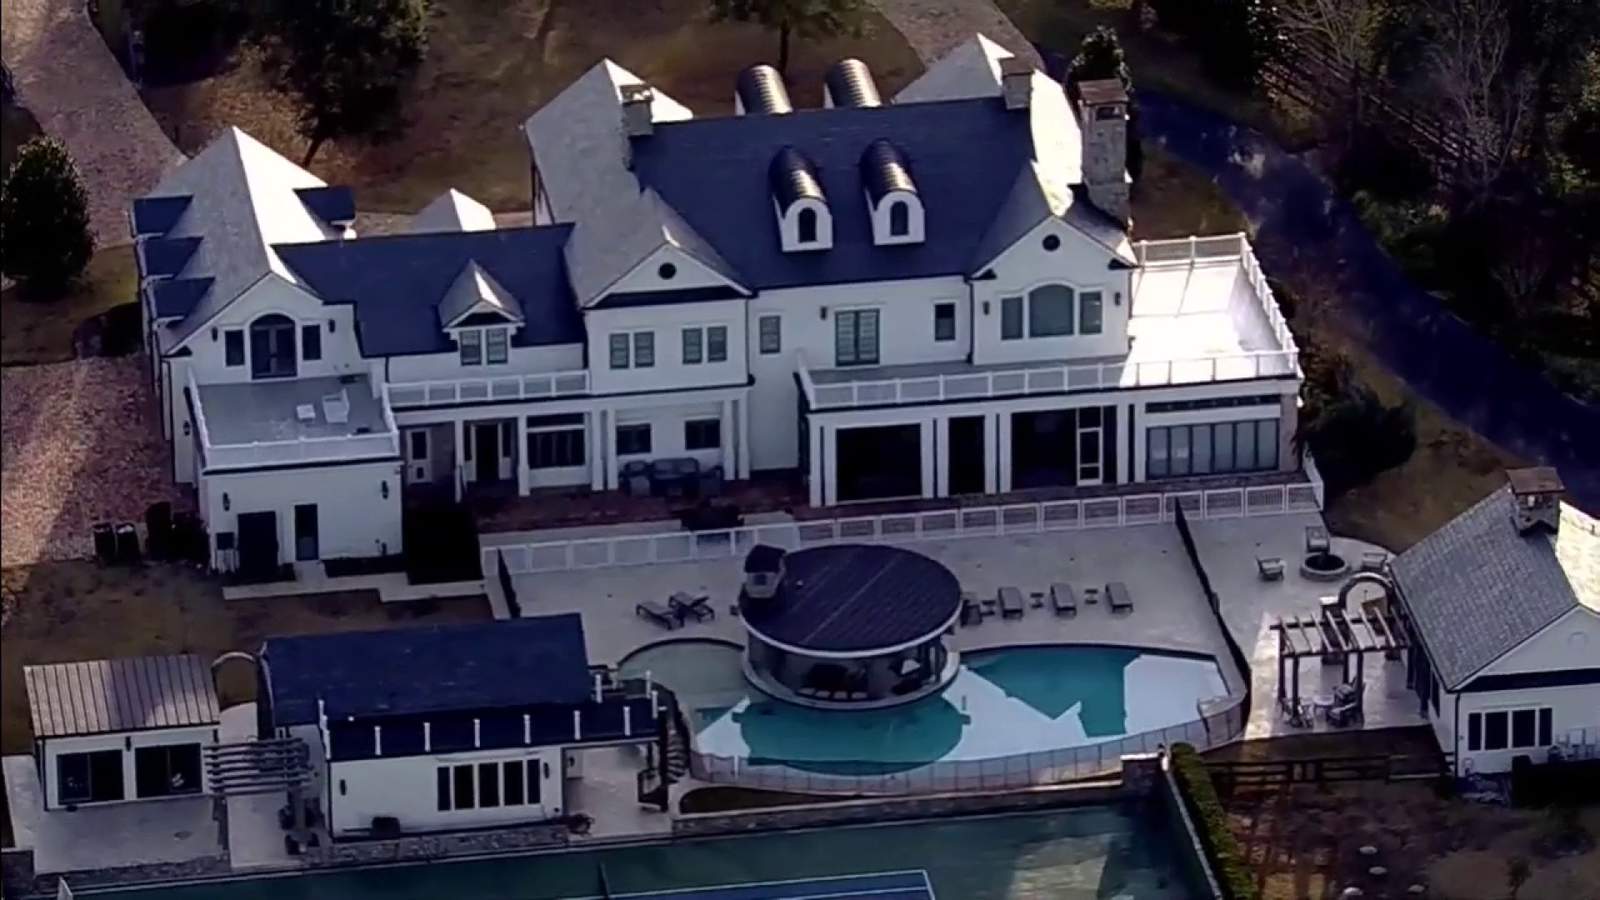 Florida man uses $7.2M from PPP to buy mansion, Maserati and more, feds say